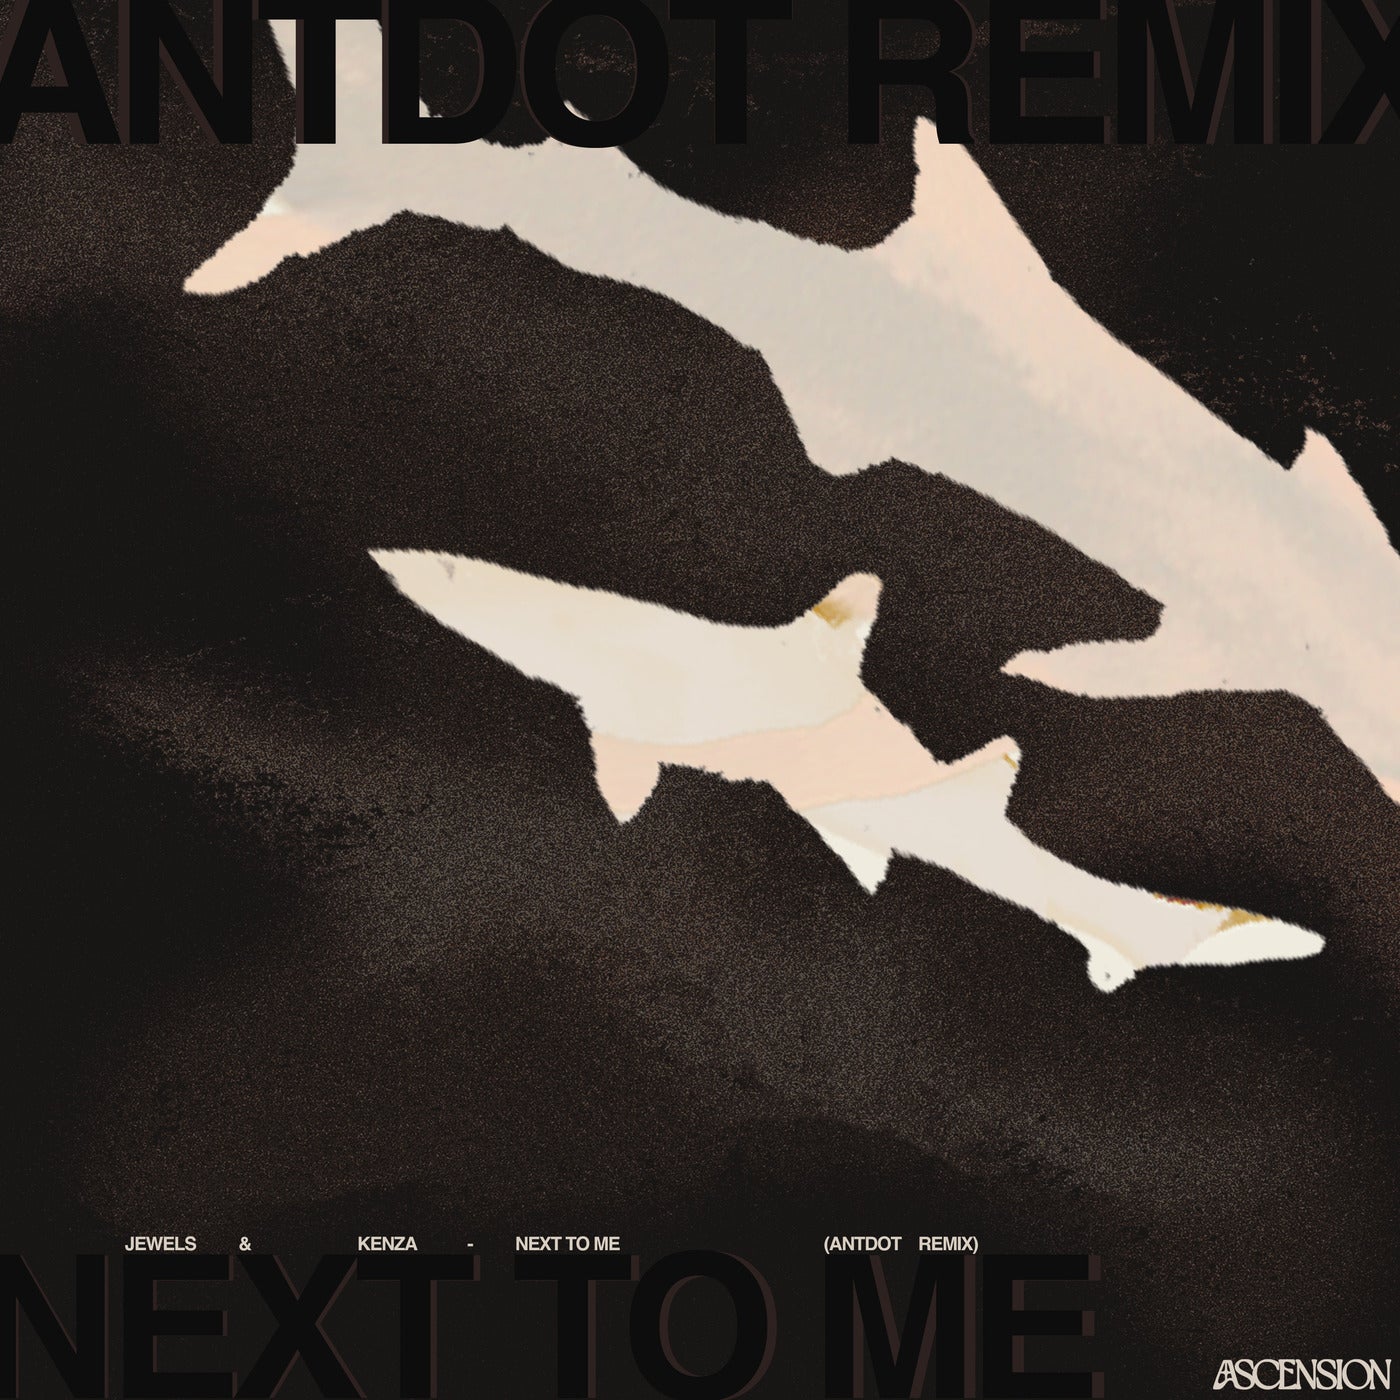 image cover: JEWELS, Kenza, LE YORA - Next To Me - Antdot Remix on Ascension Label